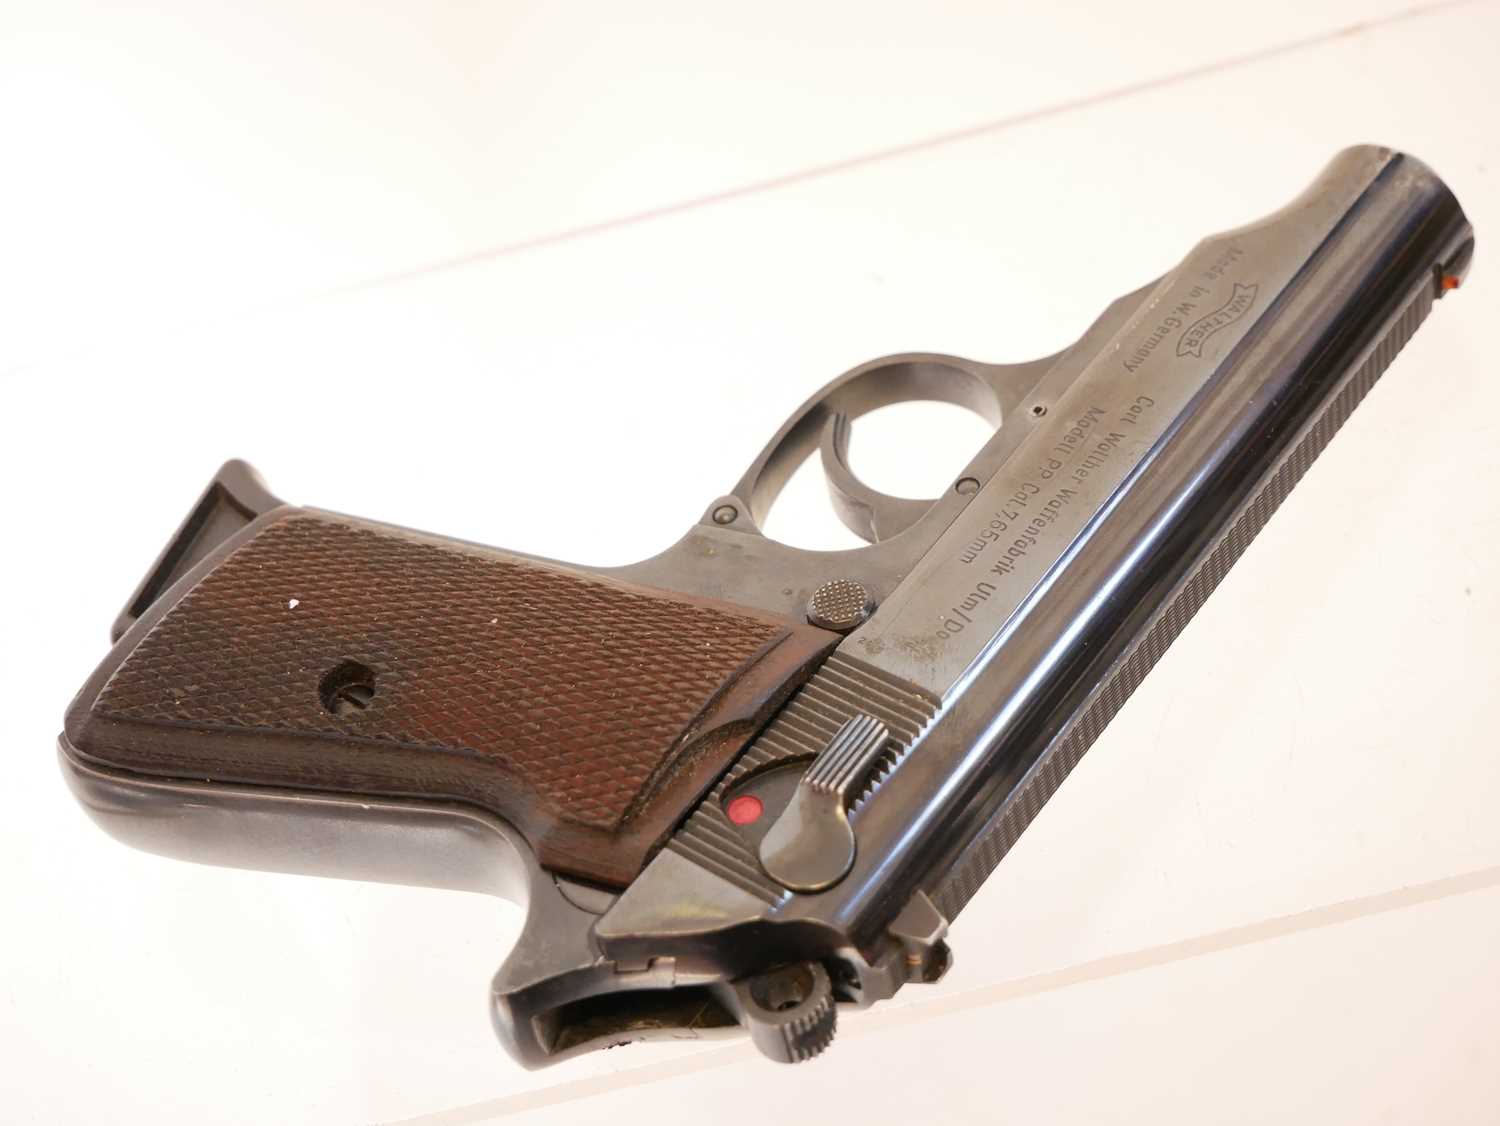 Deactivated Walther PP 7.65mm semi automatic pistol, serial number 398802, with one magazine. - Image 4 of 6